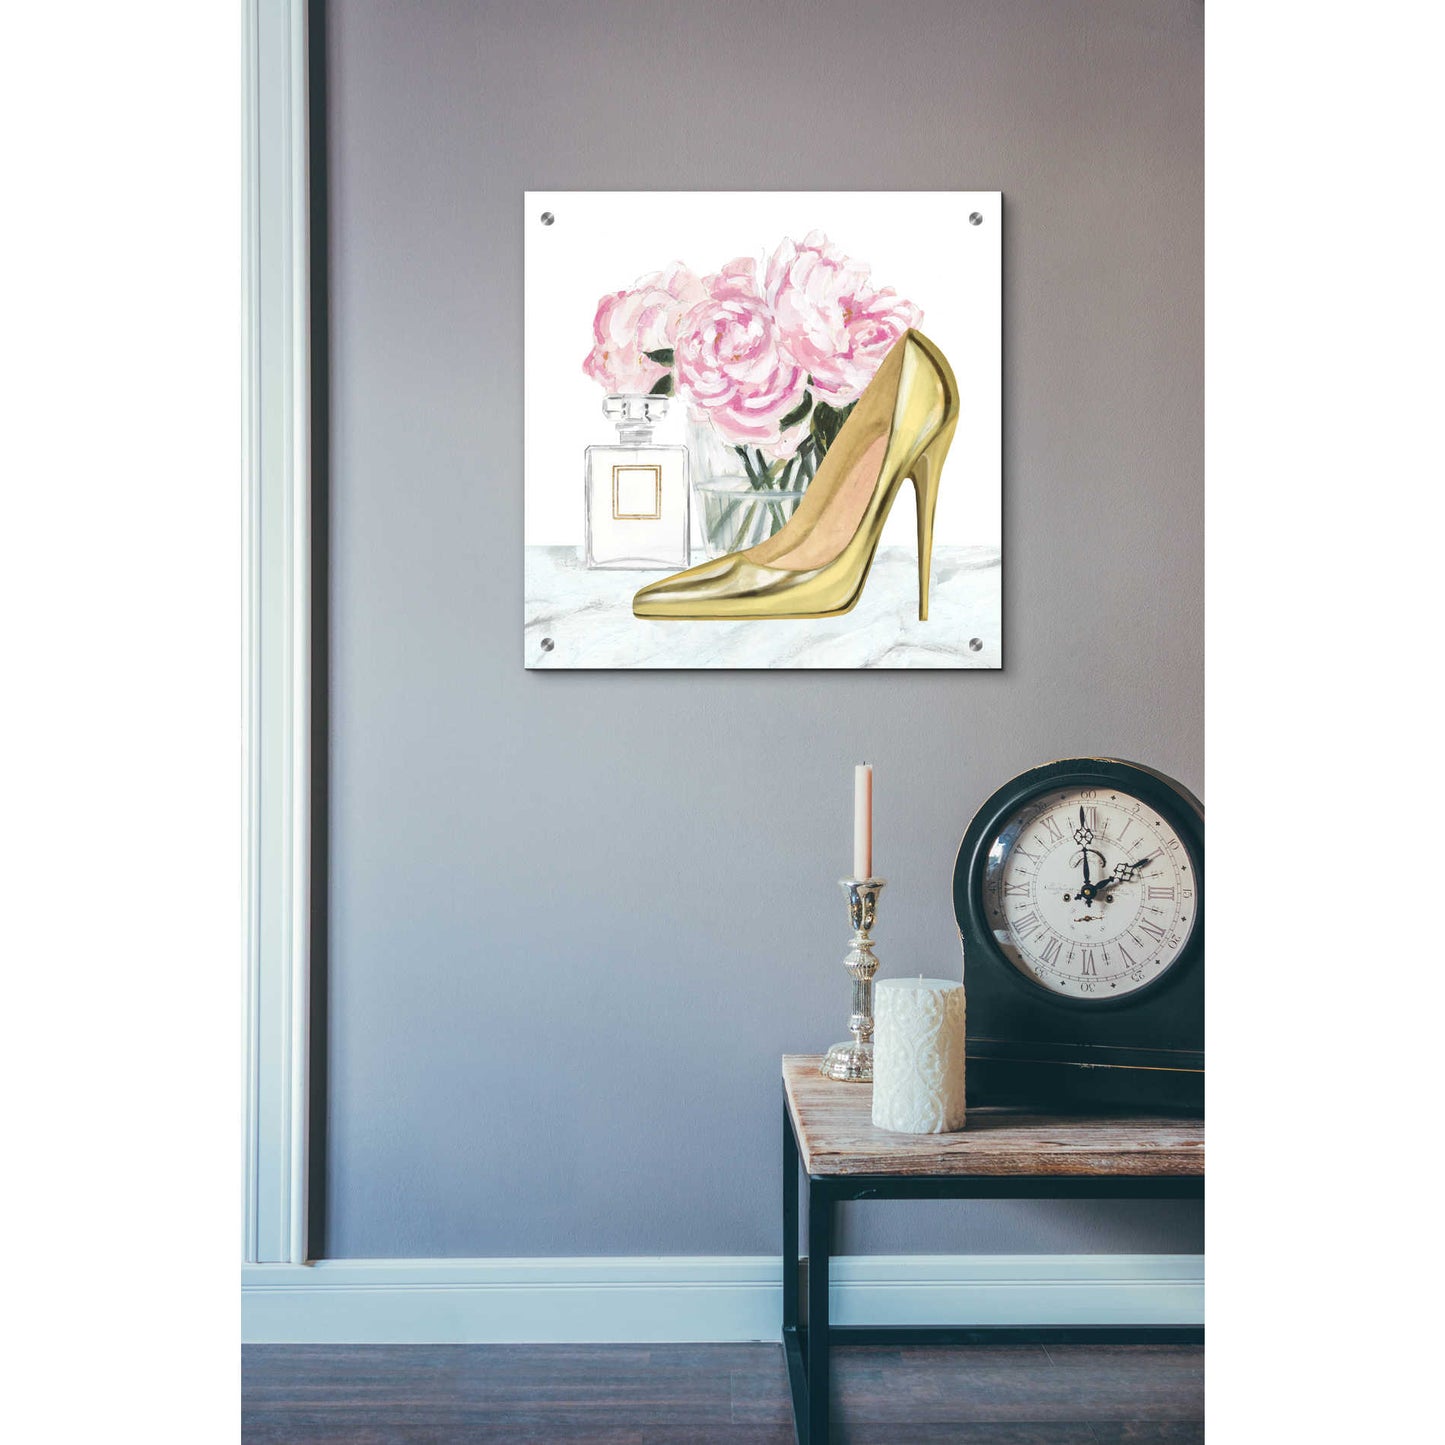 Epic Art 'Get Glam VIII' by Victoria Borges, Acrylic Glass Wall Art,24x24